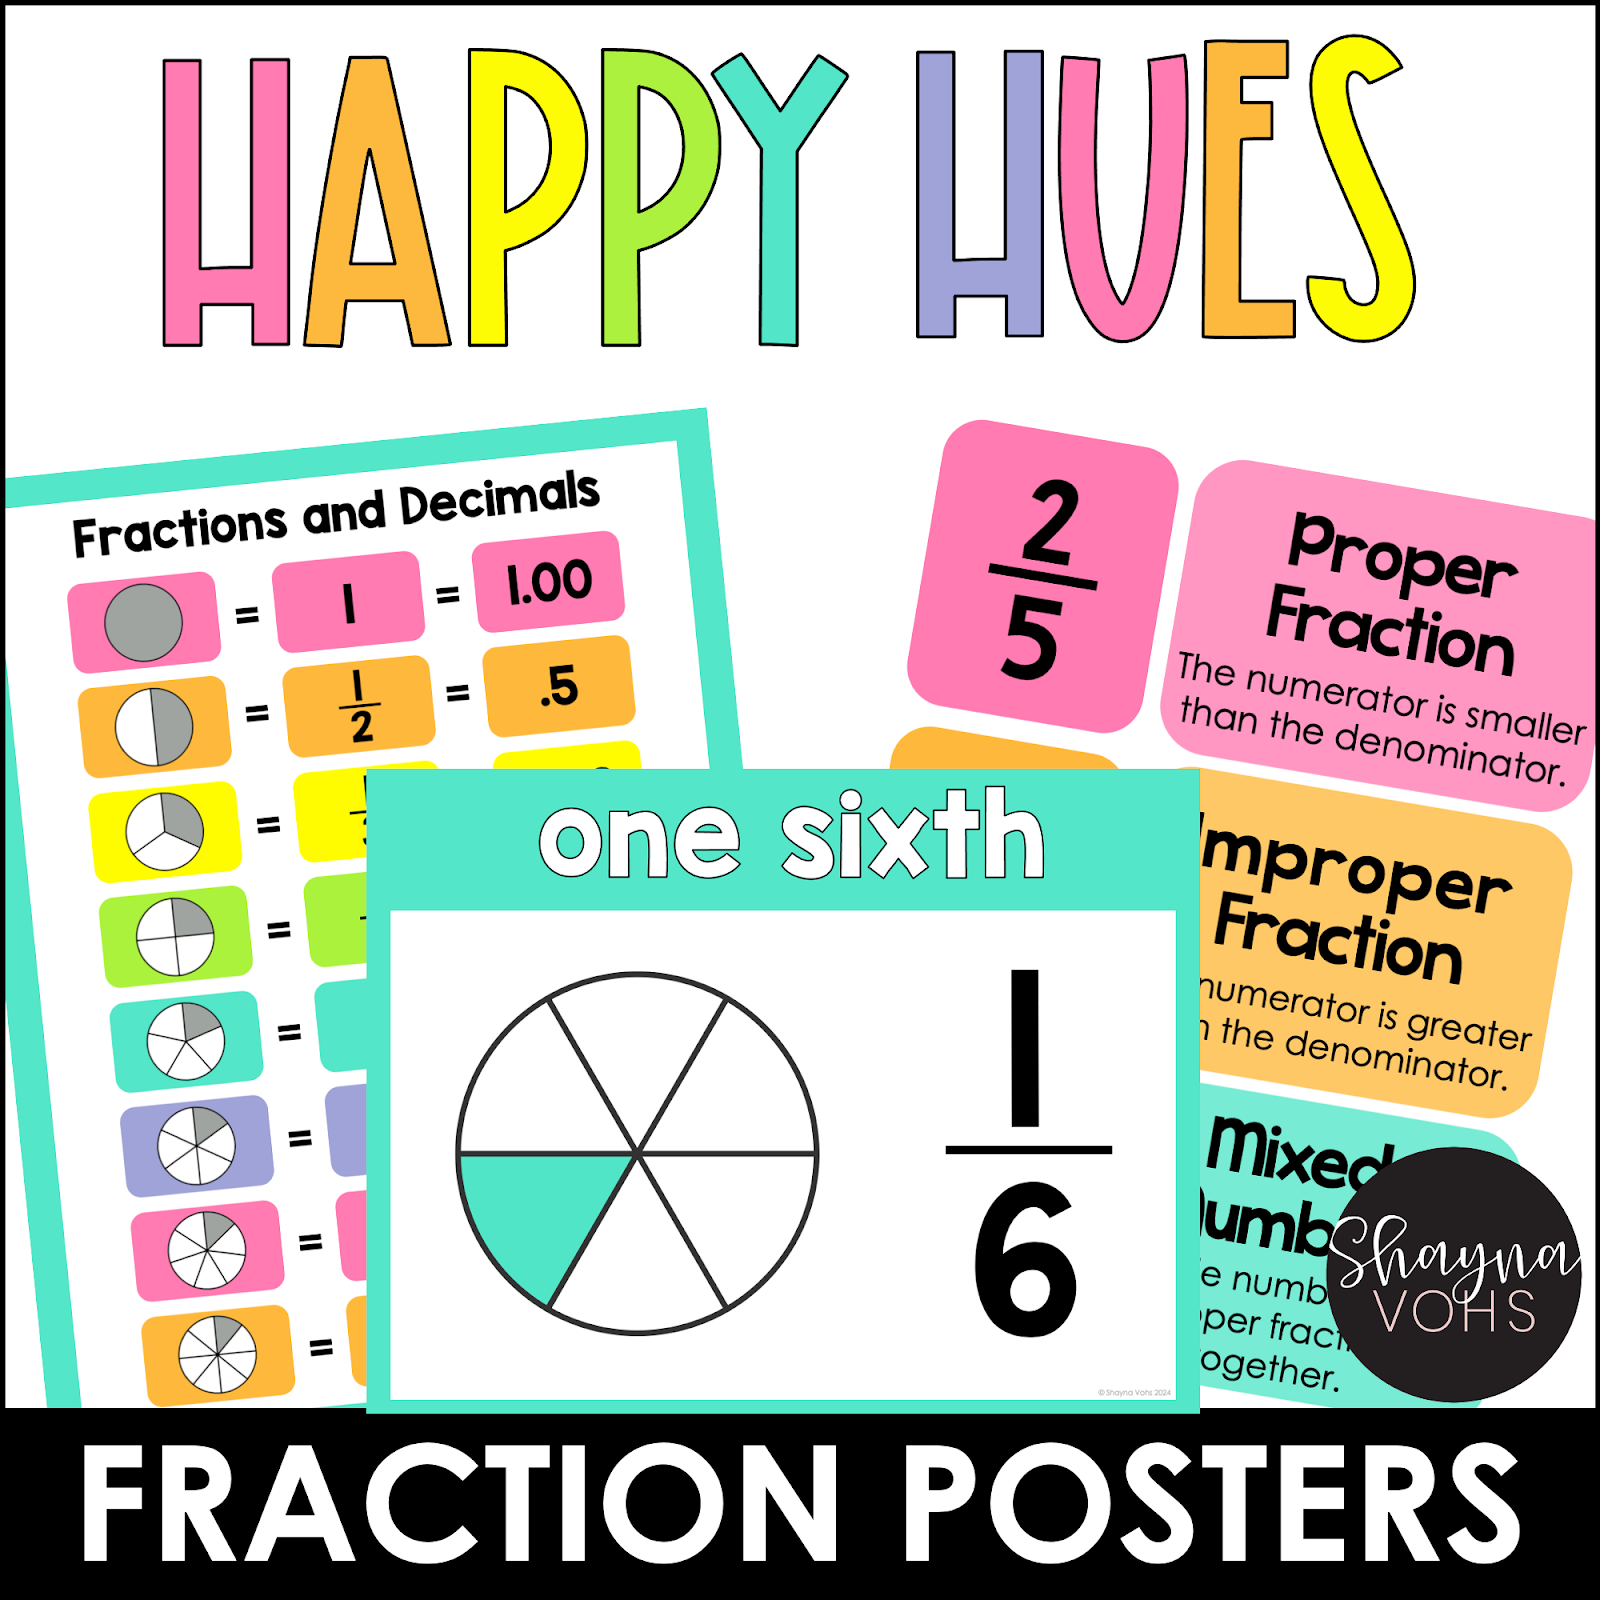 This image shows fraction posters in a Bright, Happy hues color scheme. 